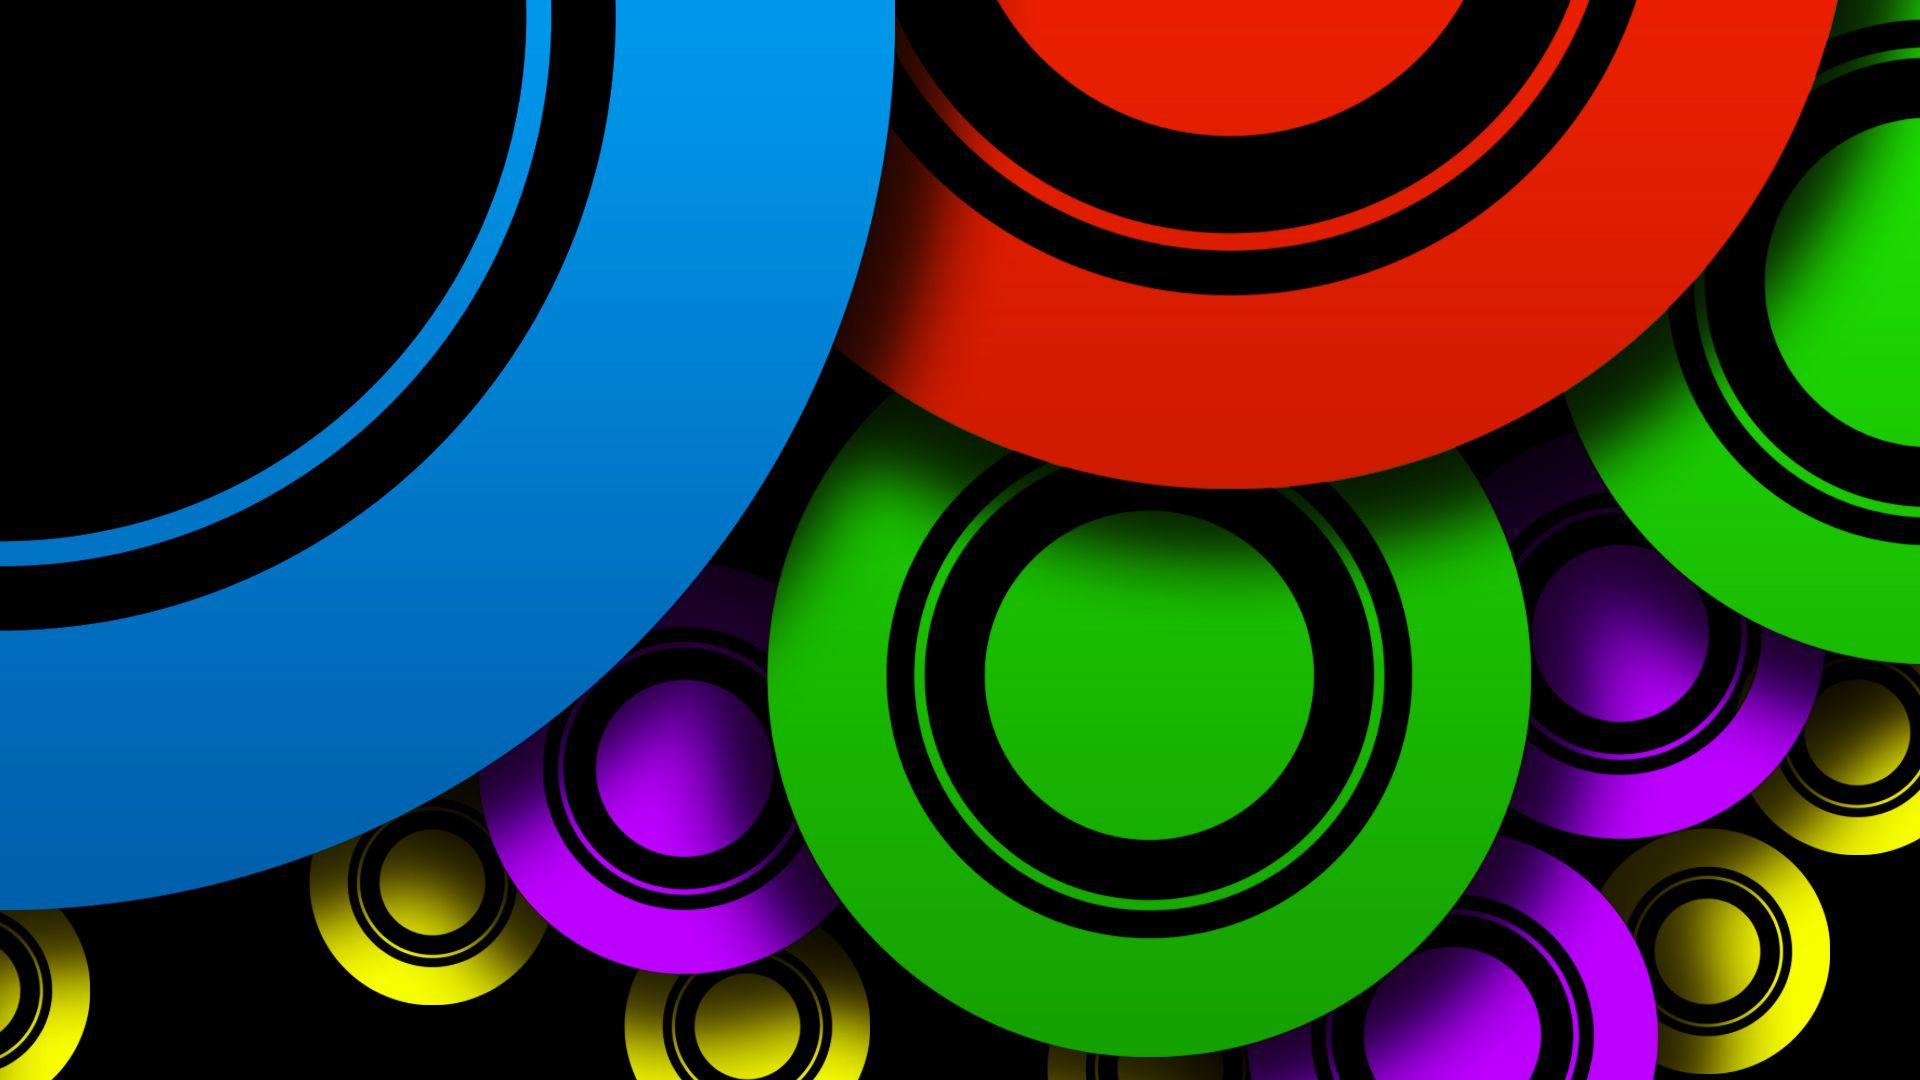 700+ Circle HD Wallpapers and Backgrounds